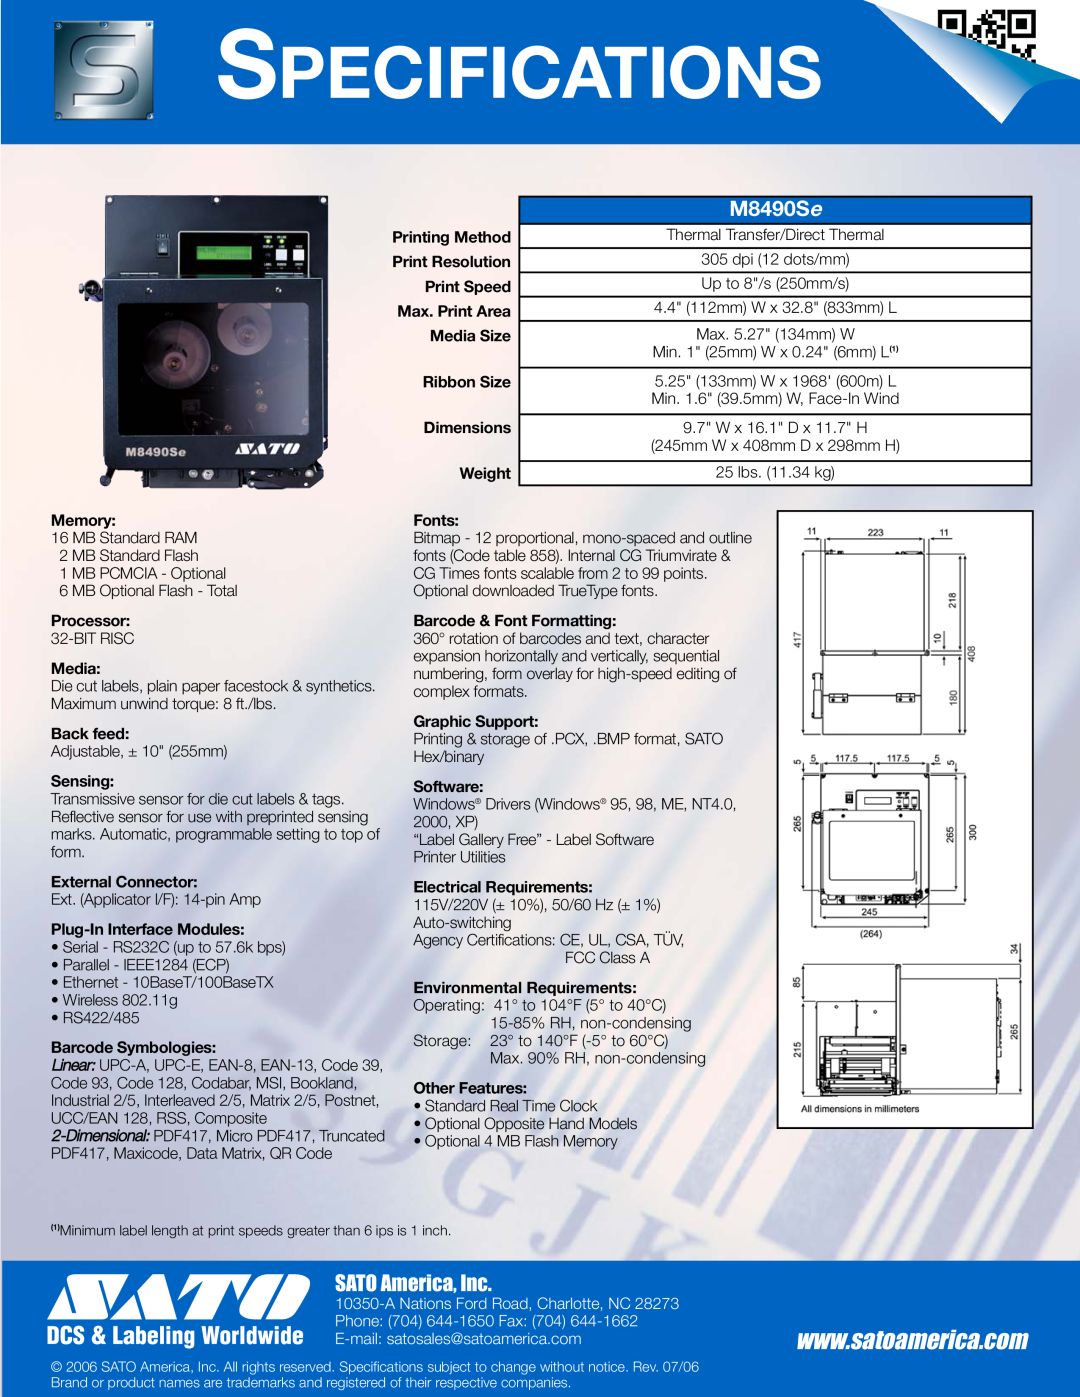 SATO M8490Se manual Specifications, SATO America, Inc, A Nations Ford Road, Charlotte, NC, Phone 704 644-1650 Fax 704 